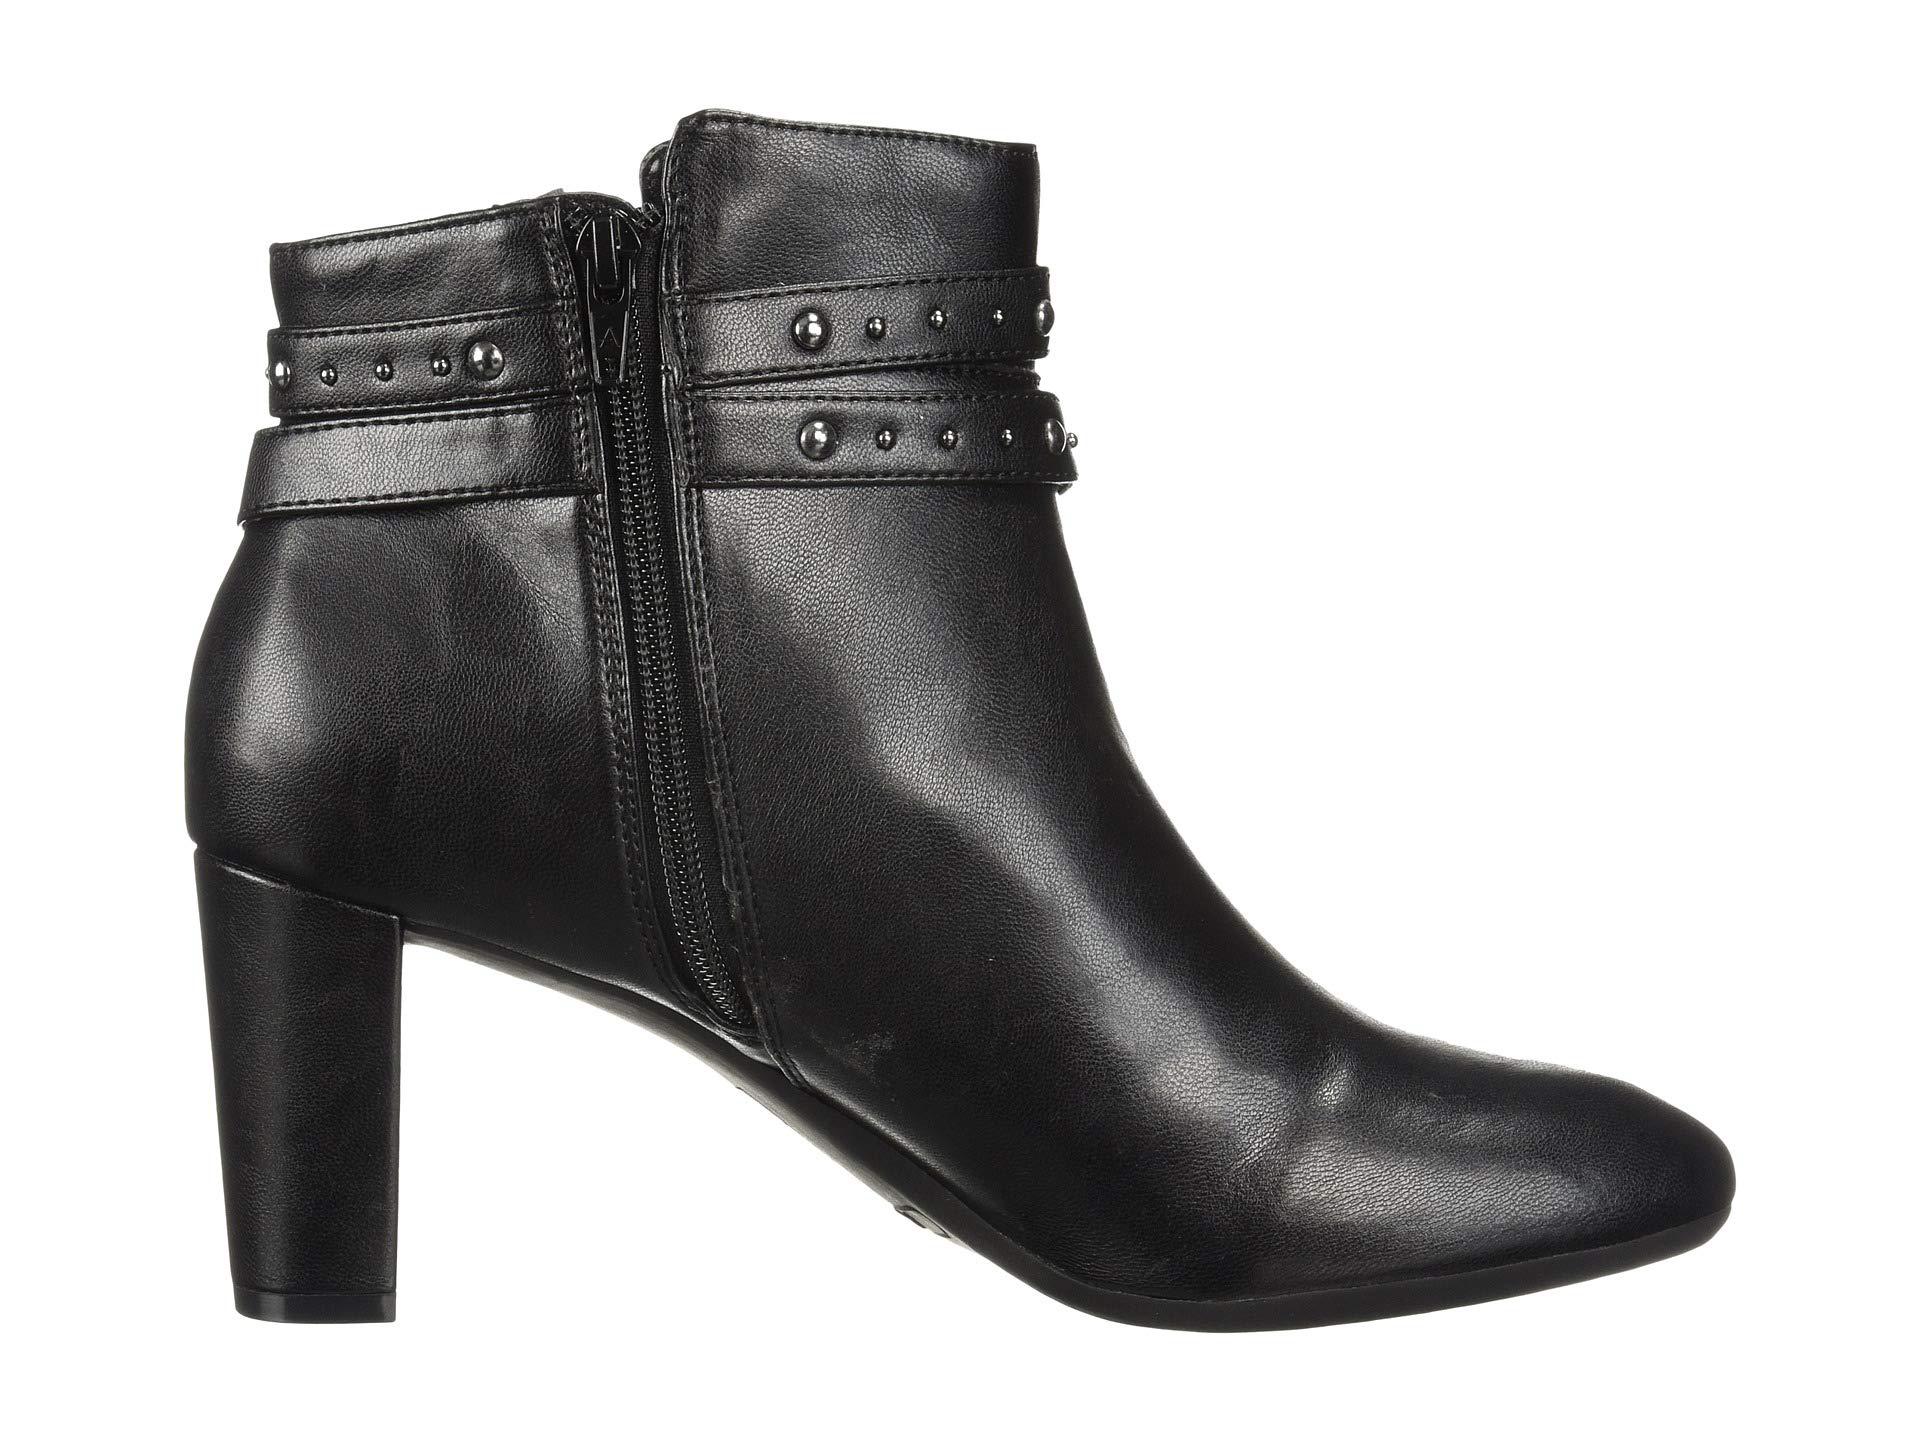 A2 By Aerosoles Octave Bootie in Black 